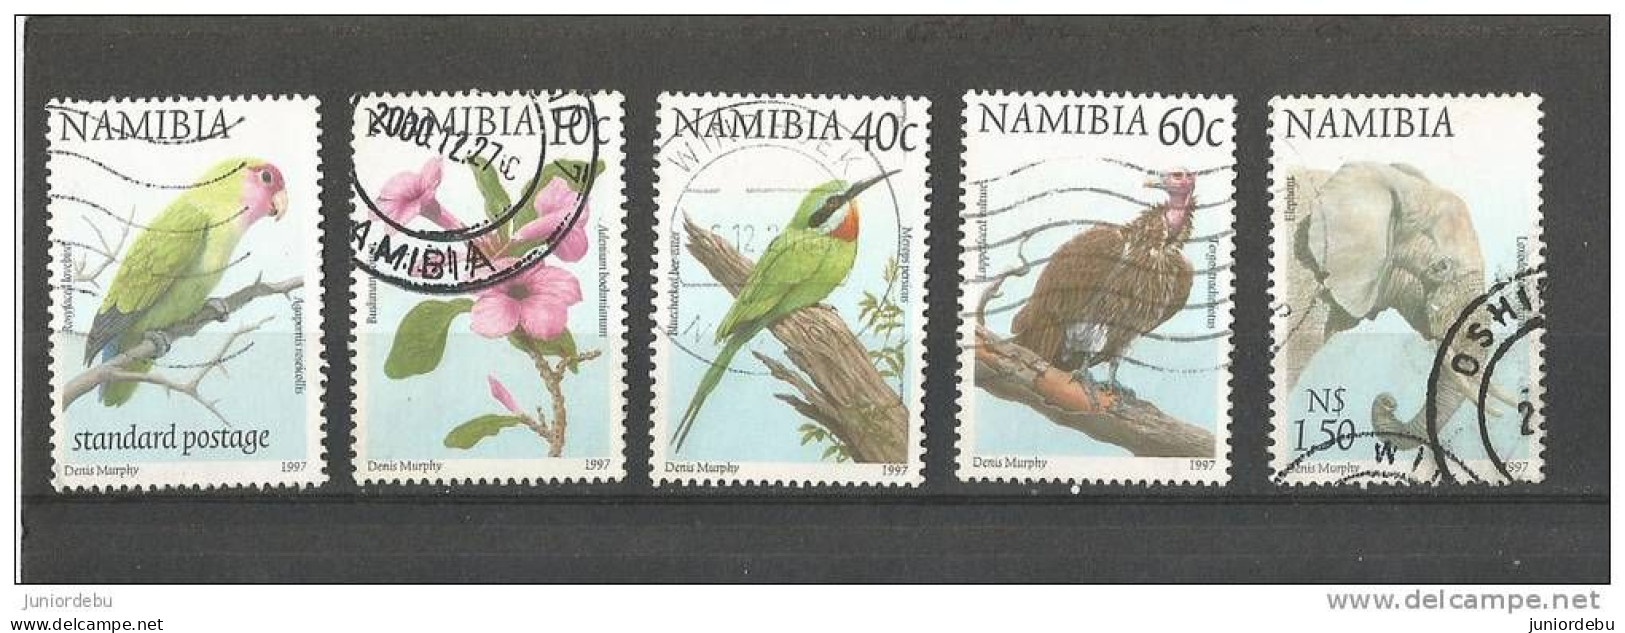 Namibia  - 1997  - Flower / Birds / Elephant - 5 Different - USED. ( D ) ( Condition As Per Scan ) ( OL 05/05/2013 ) - Namibie (1990- ...)